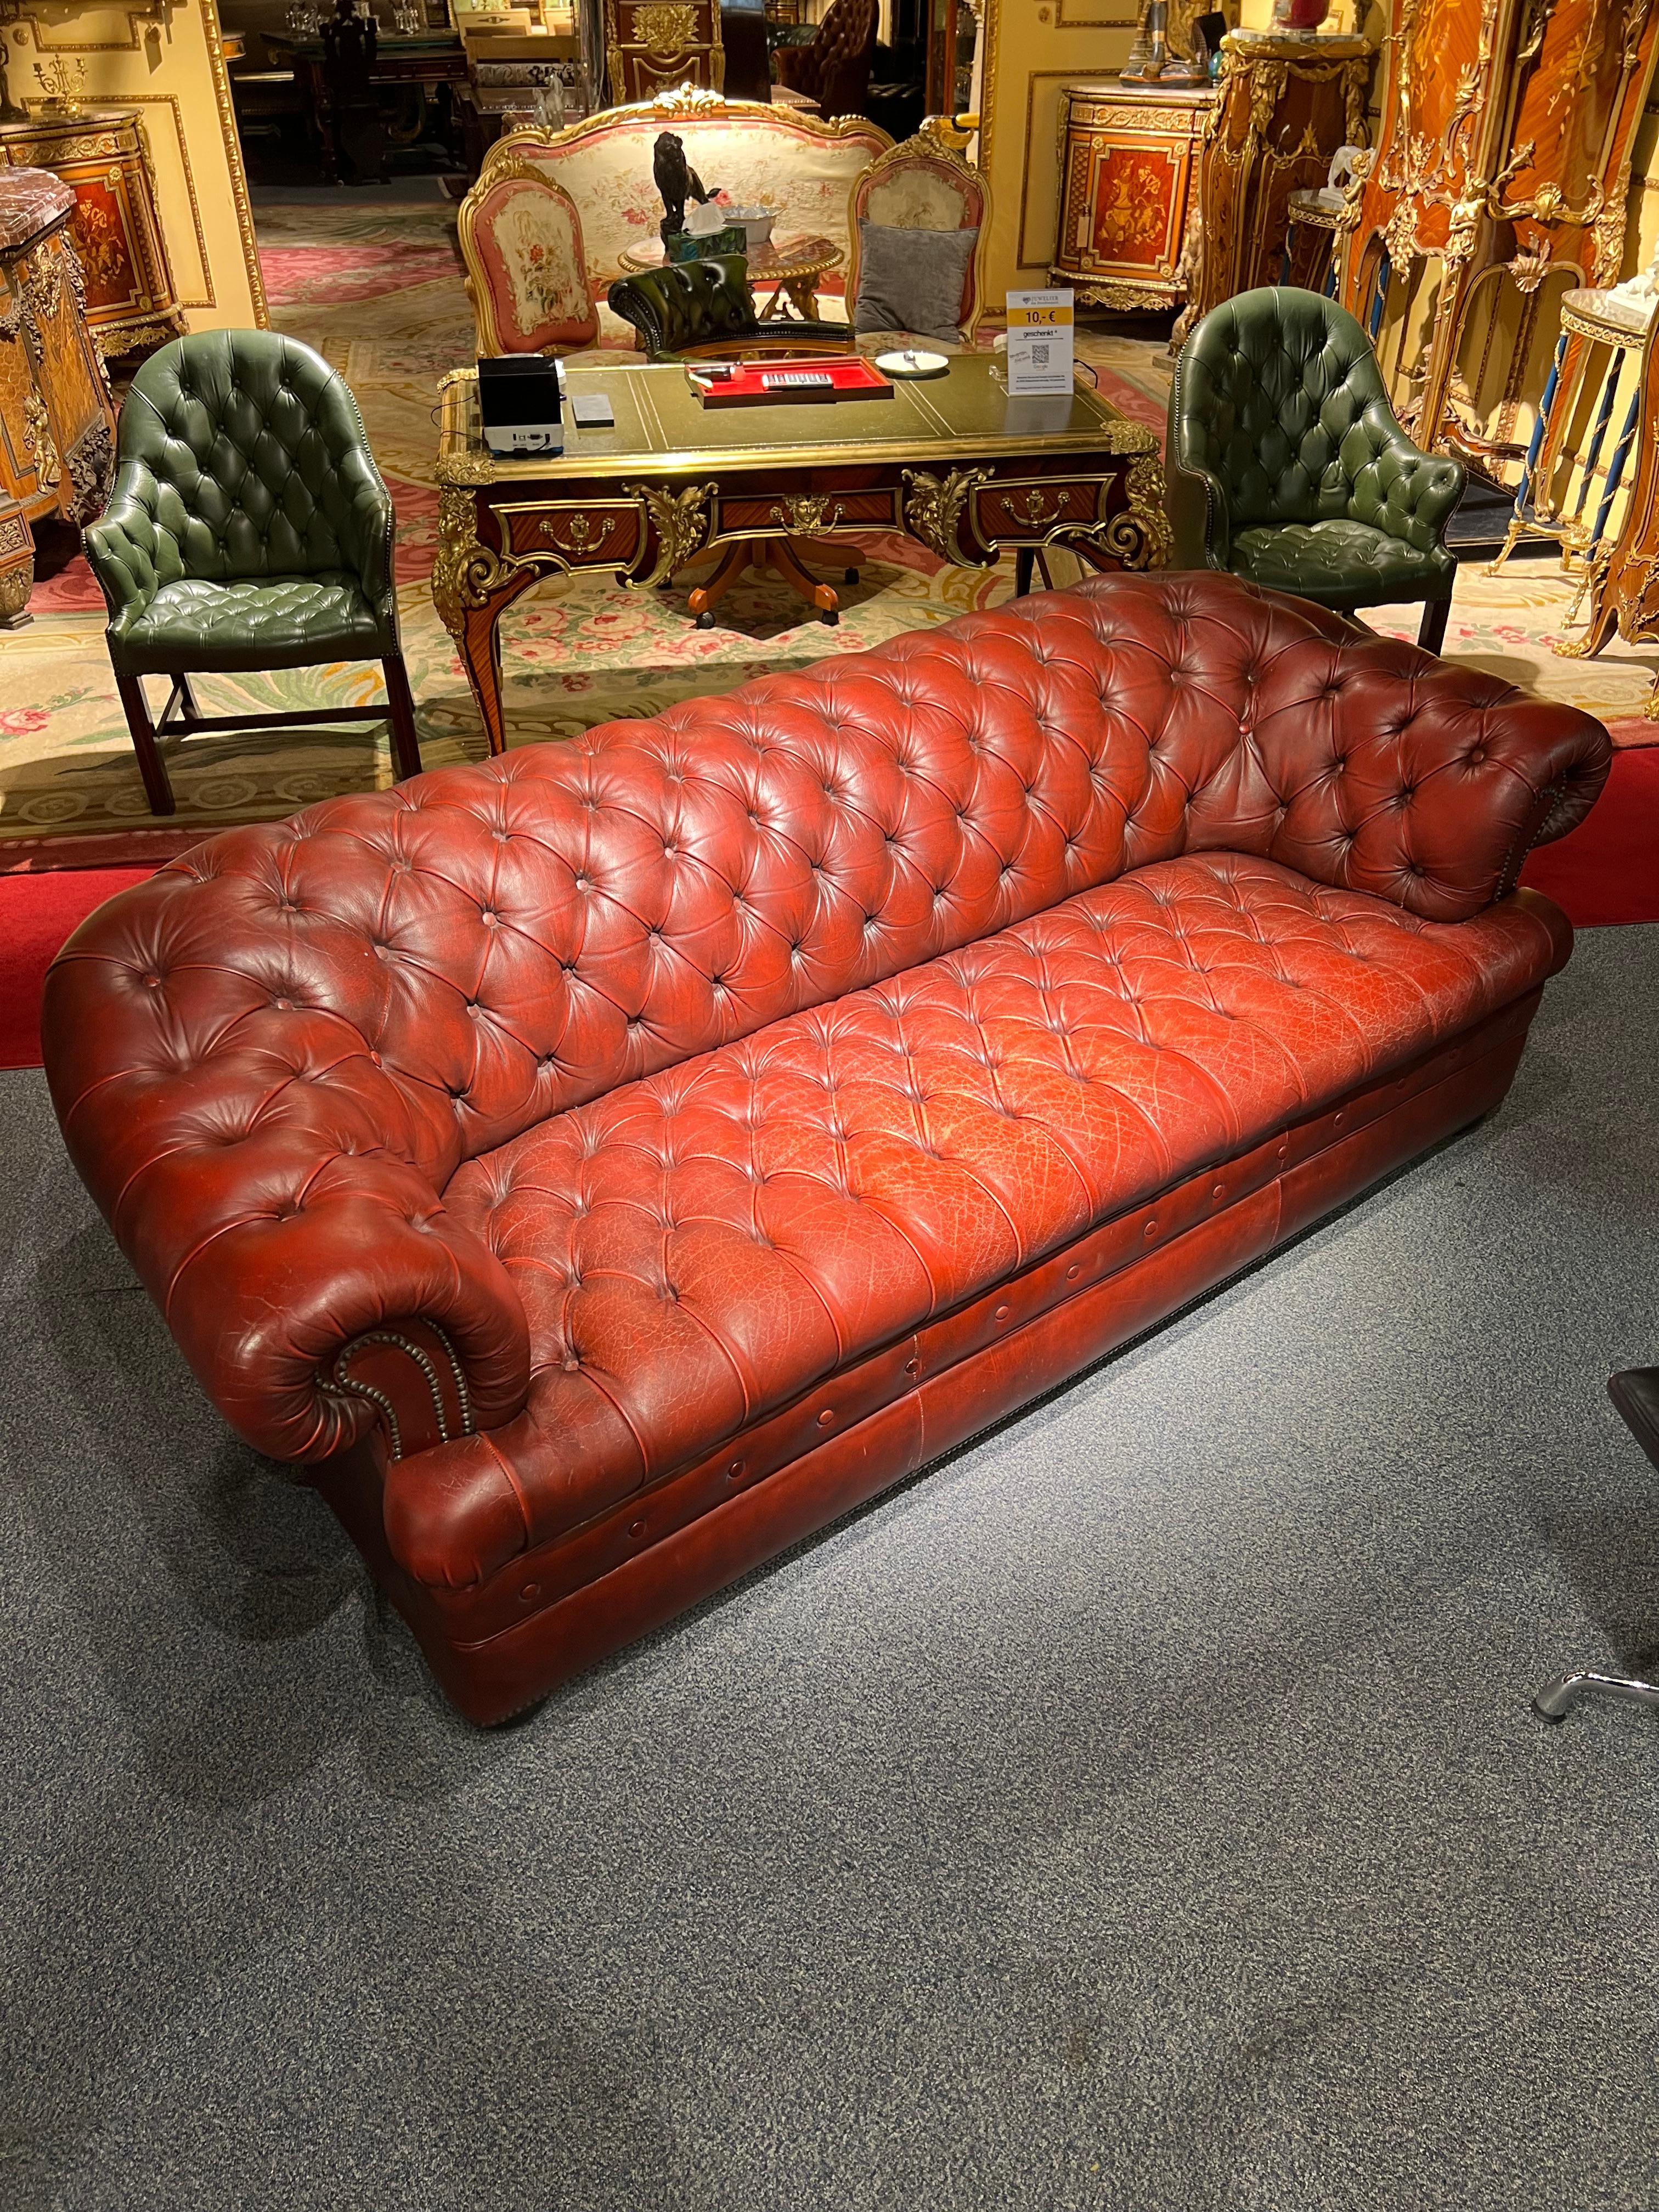 Stunning Vintage English Red Leather Chesterfield 3 Seater Sofa For Sale 3